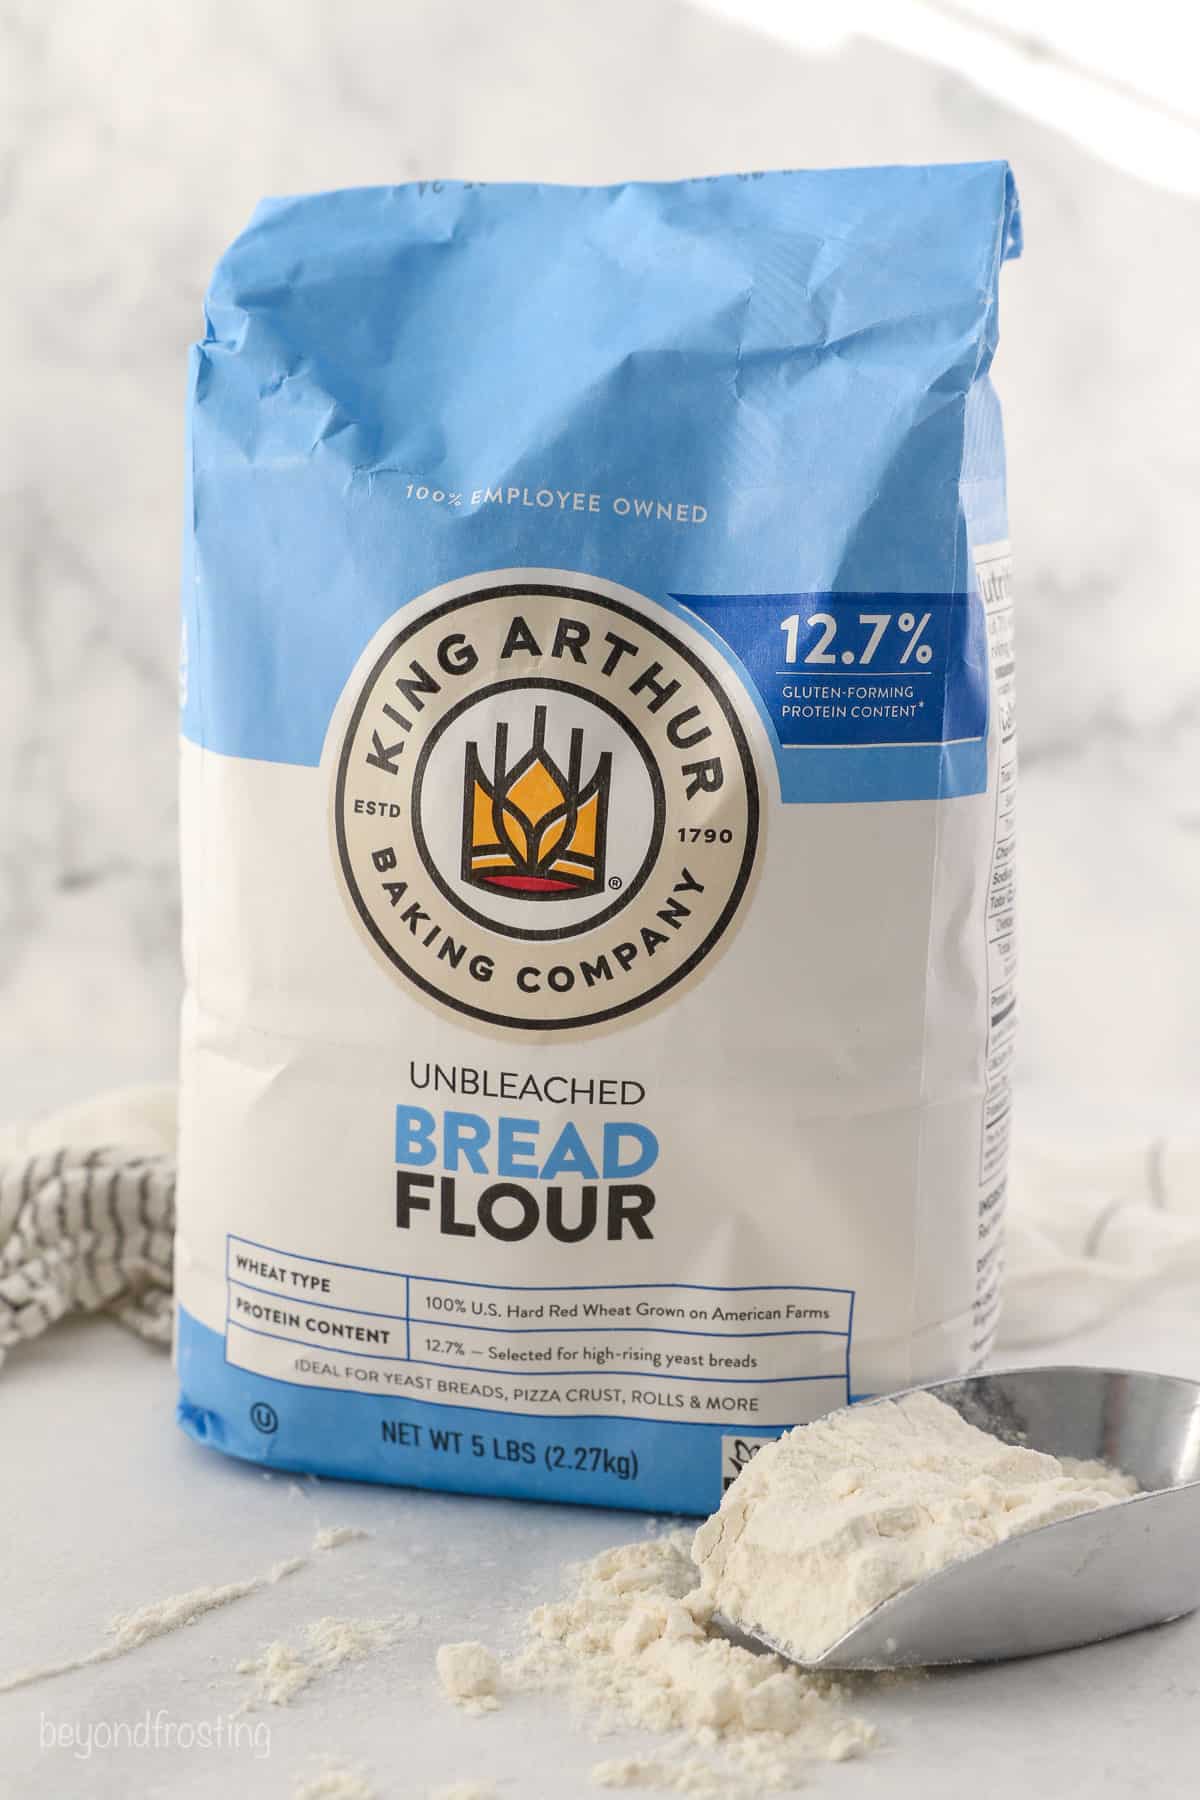 A bag of King Arthur Bread Flour with a scoop of flour next to it